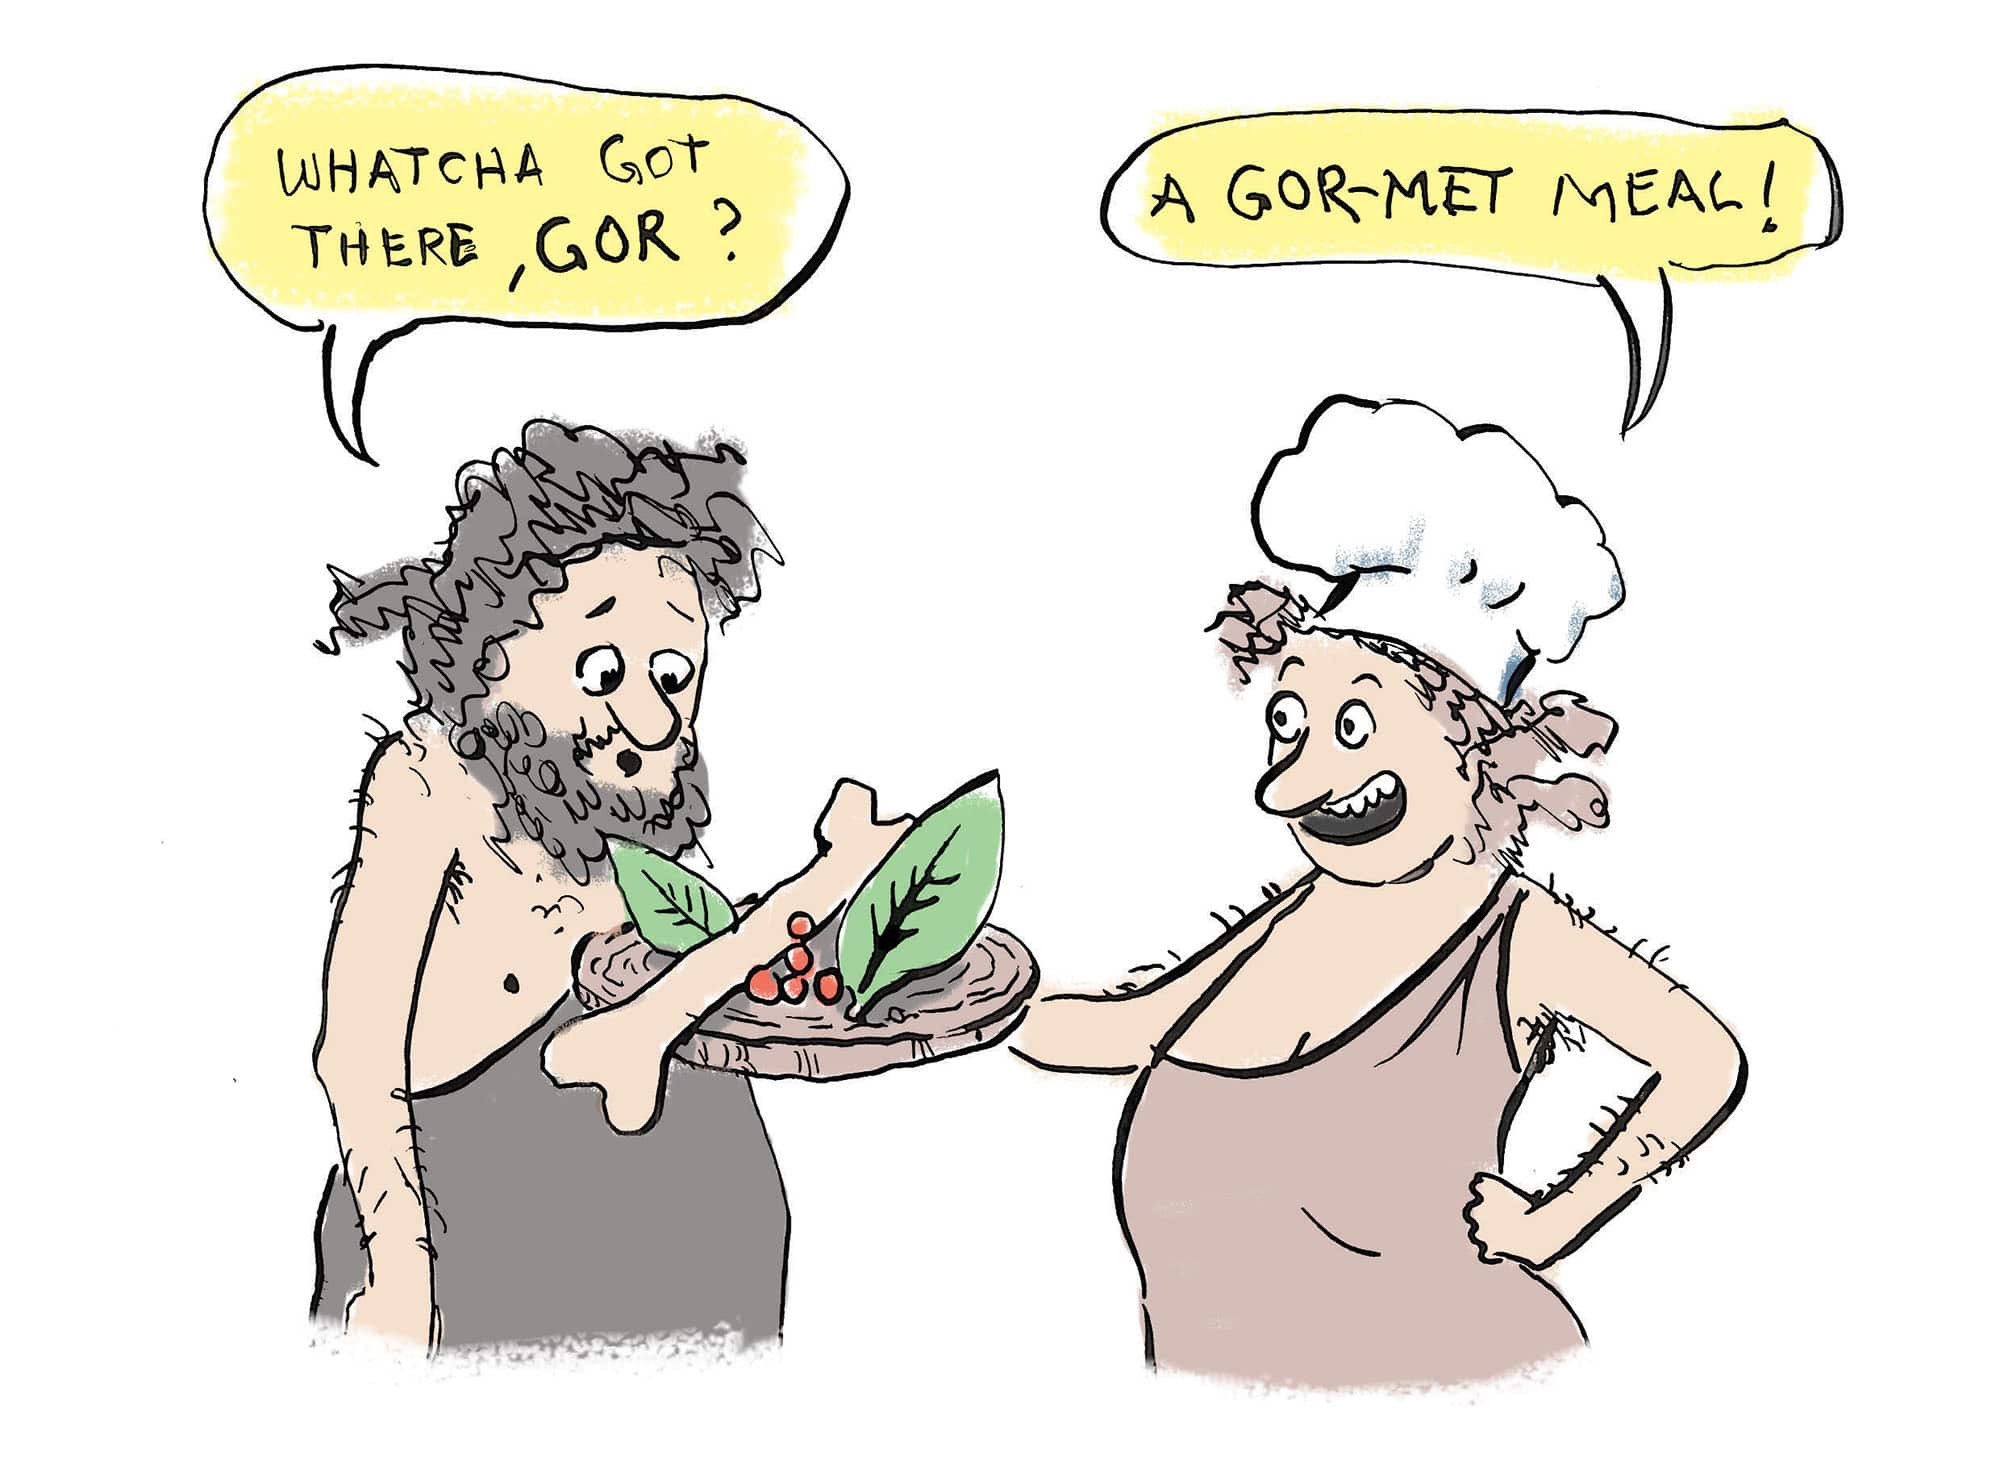 "Whatcha got there, For?" "A Gor-met meal!" from the Student Cookbook | © Sarah Morrissette